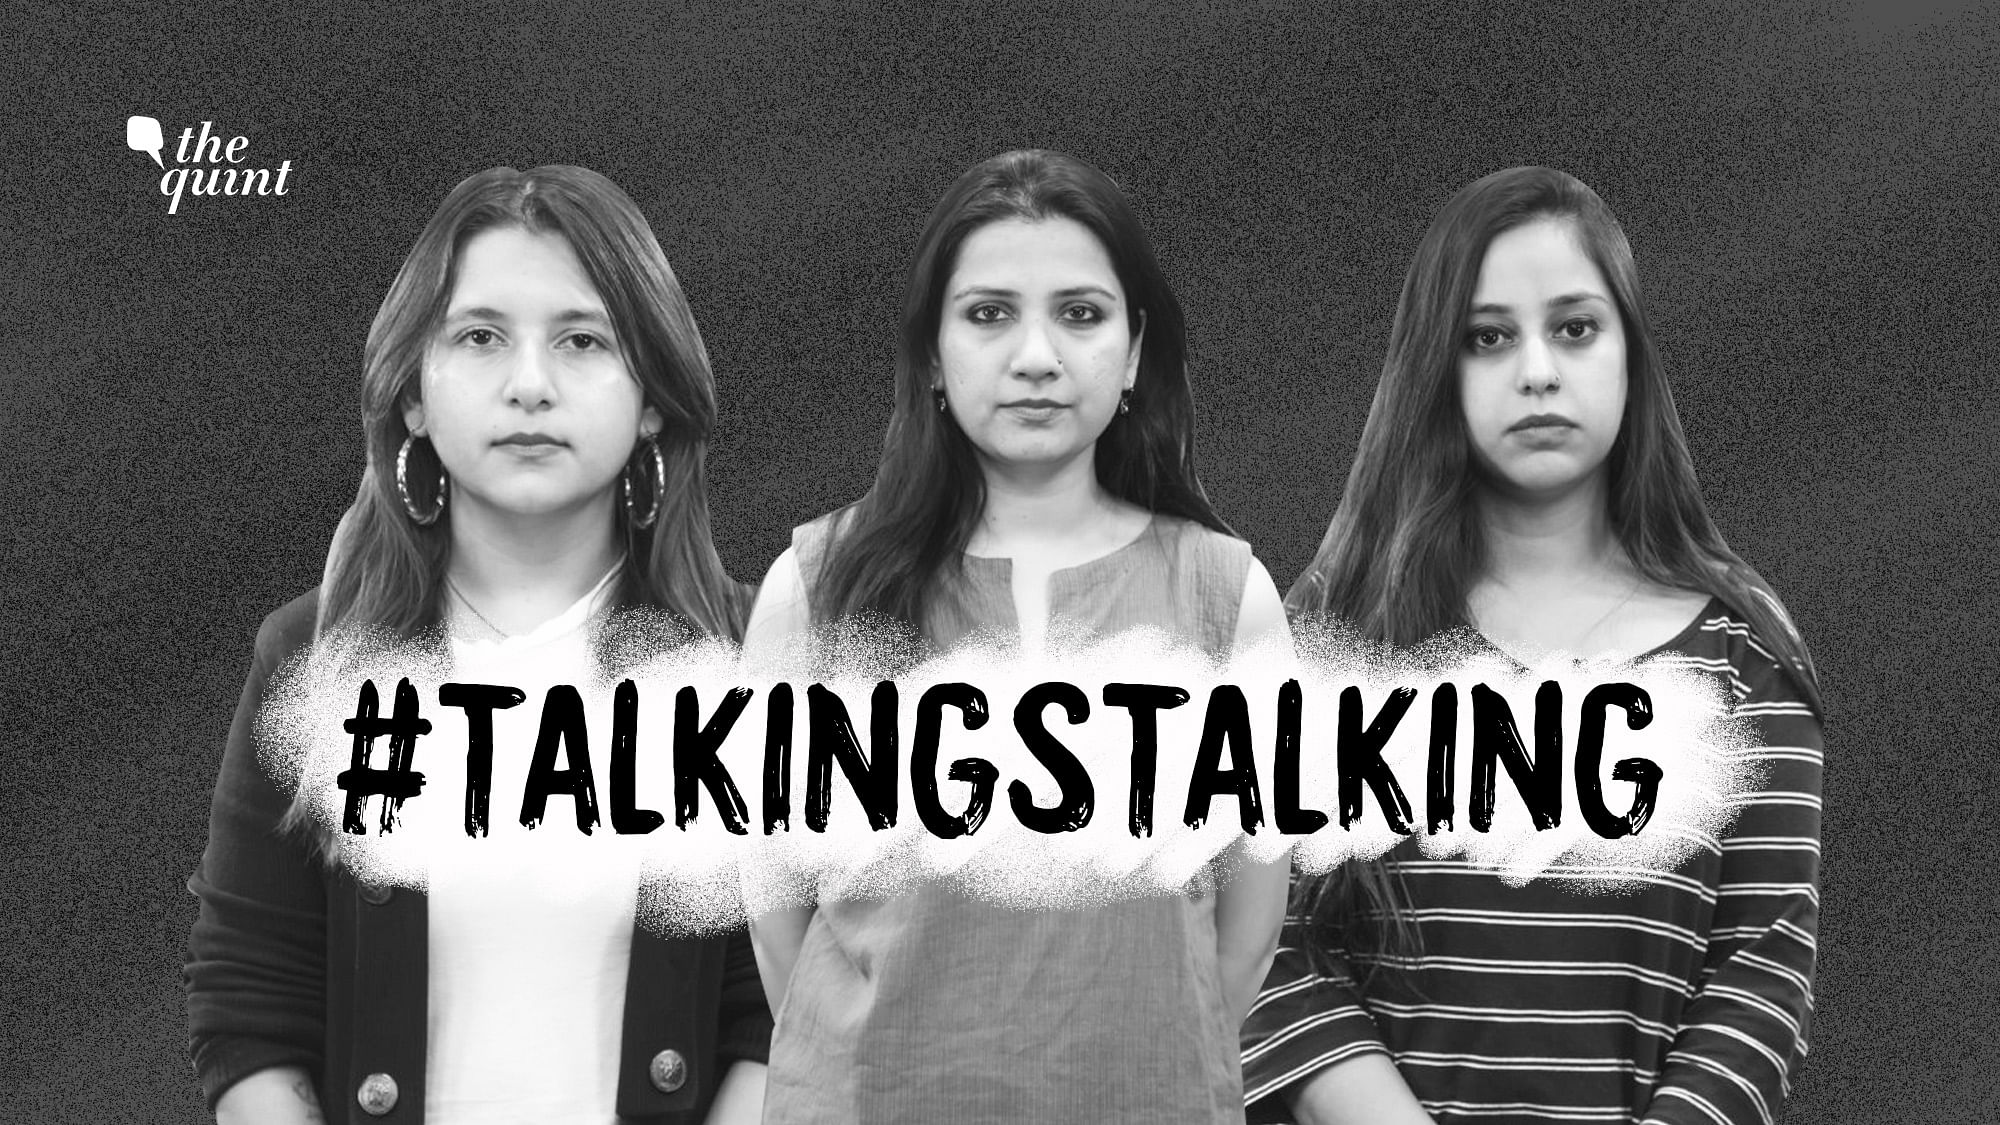 At least one case of stalking is reported every 55 minutes, yet stalking is a bailable offence in India.